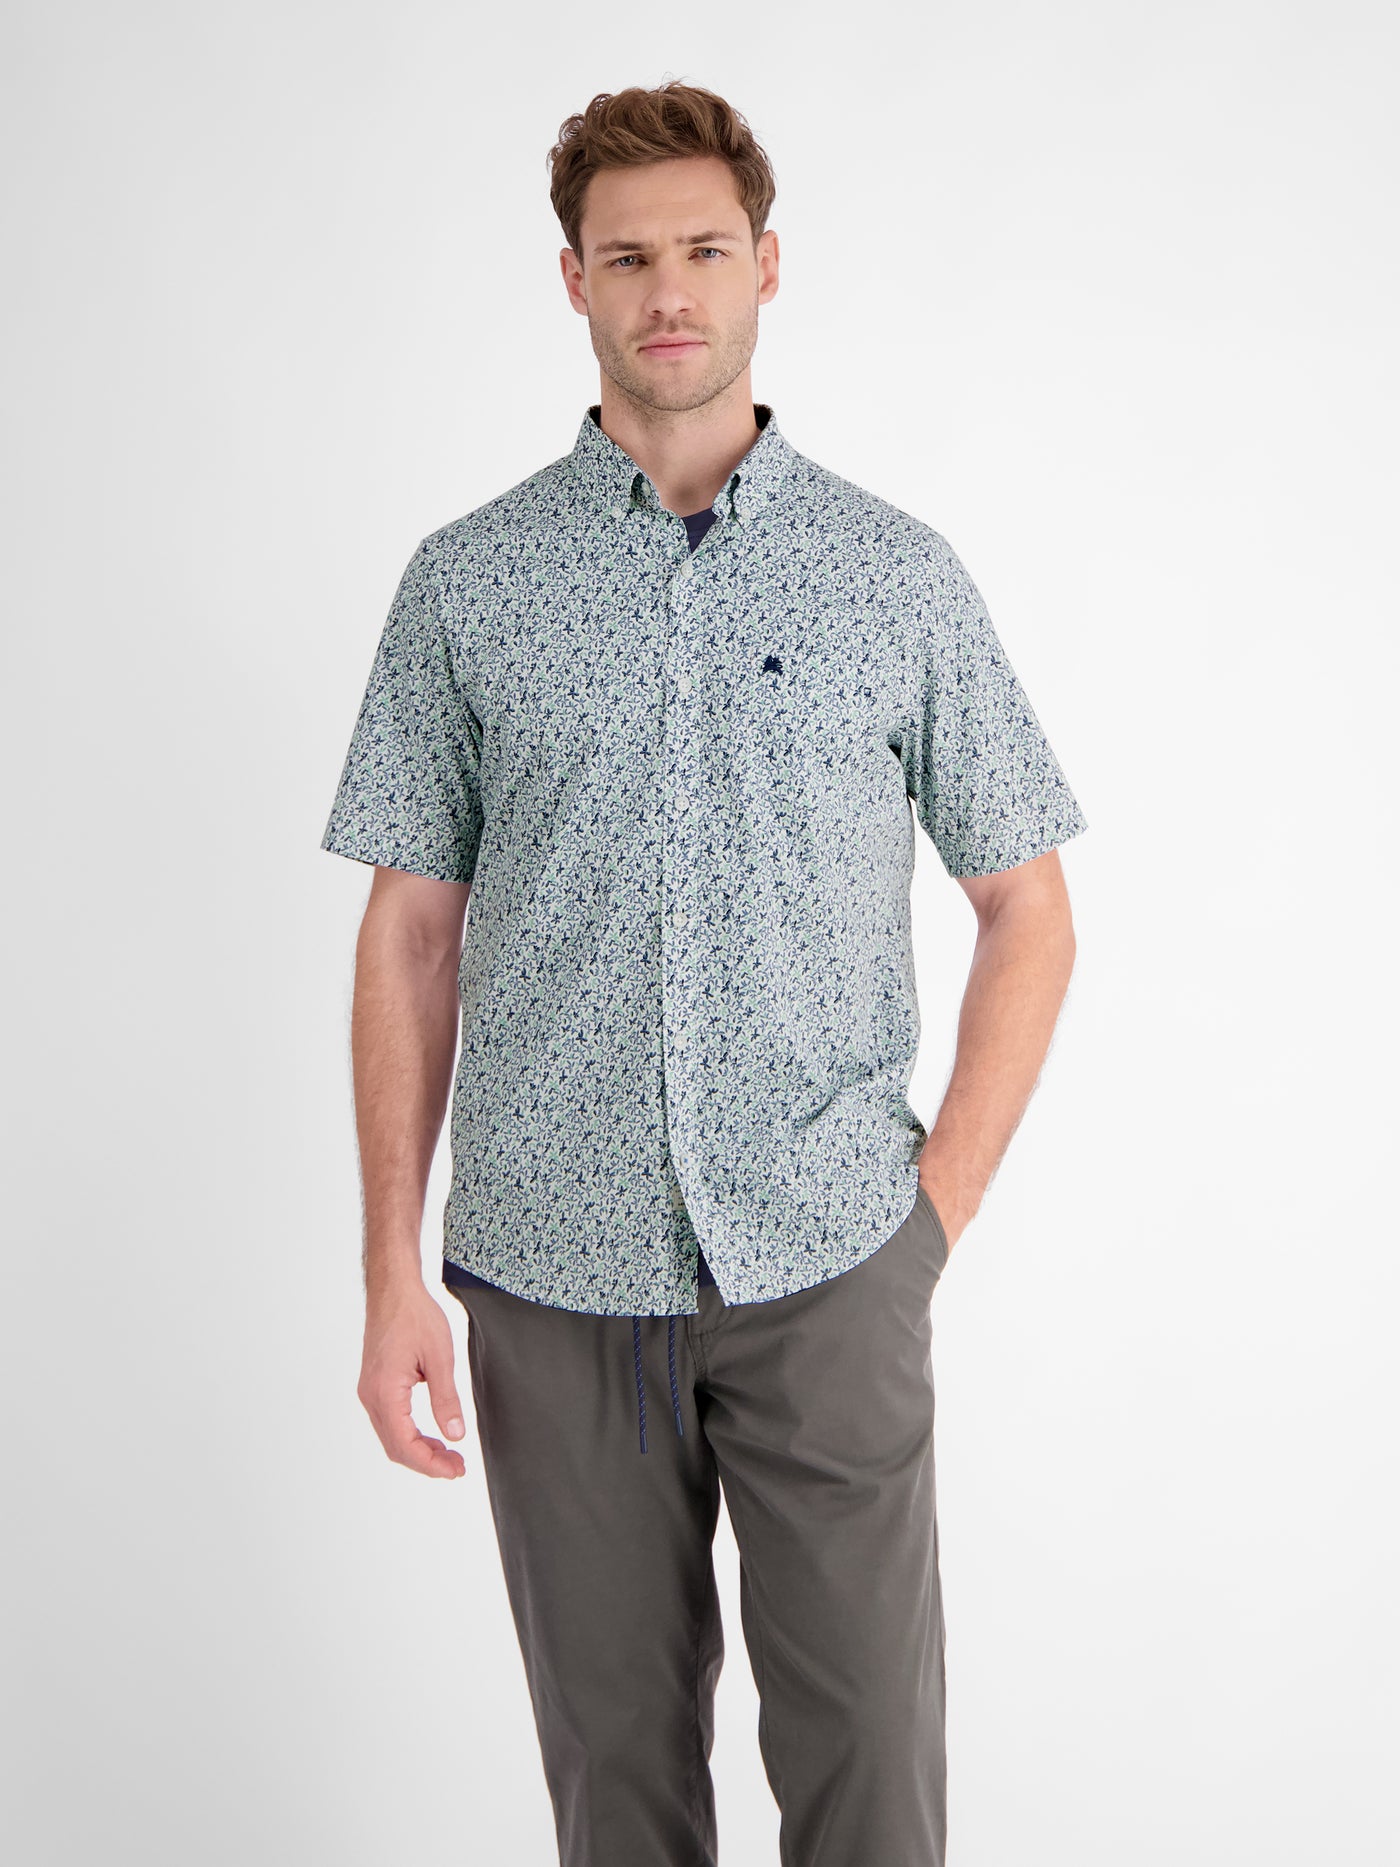 Short-sleeved shirt for men with floral print